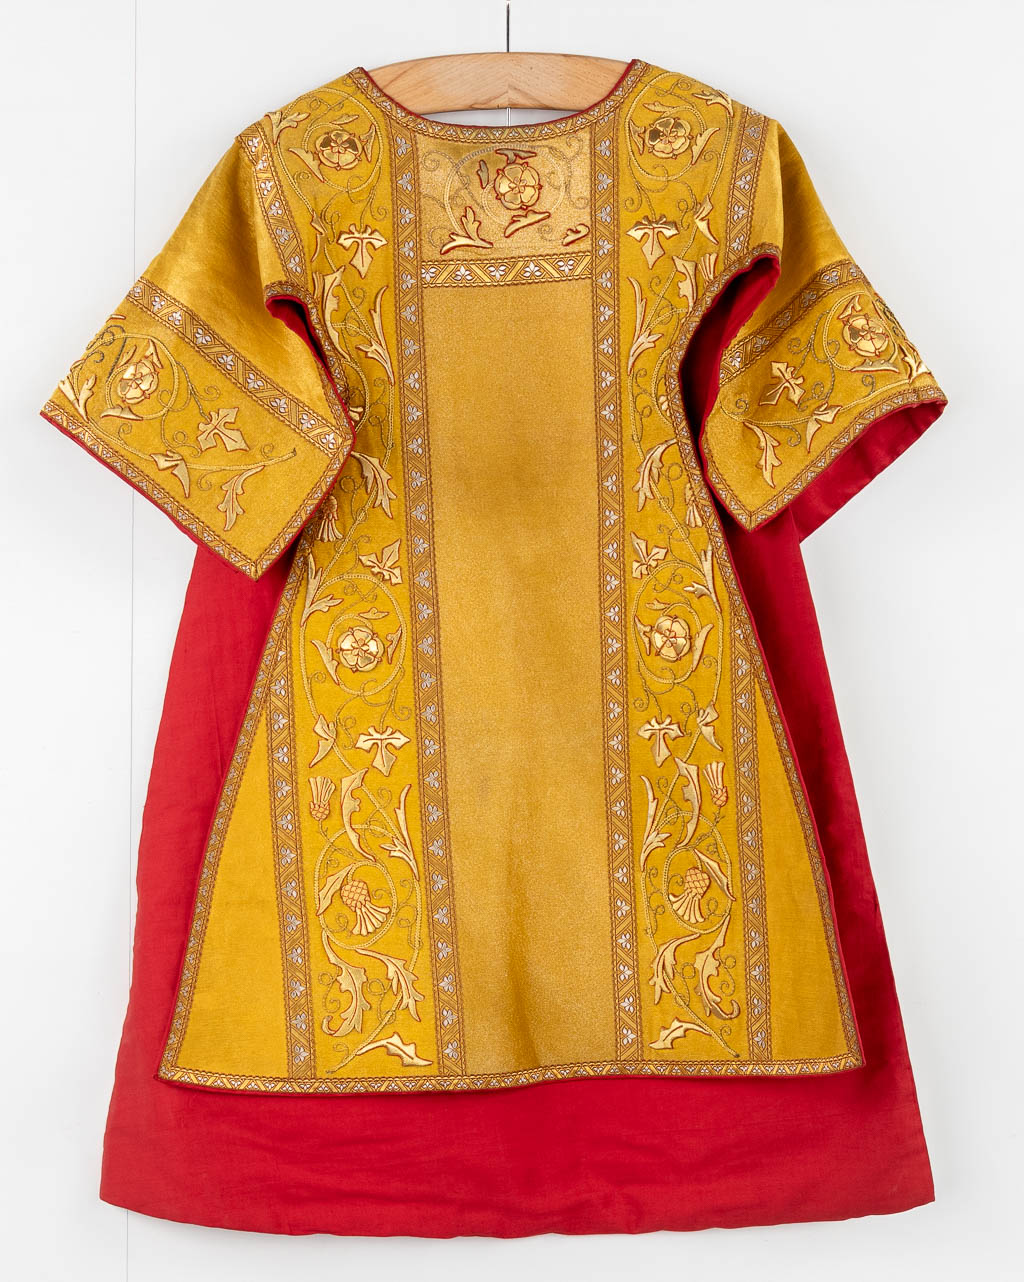 Two Dalmatics, Roman Chasuble, Chalice Veil and Stola, thick gold thread embroideries with floral decor.